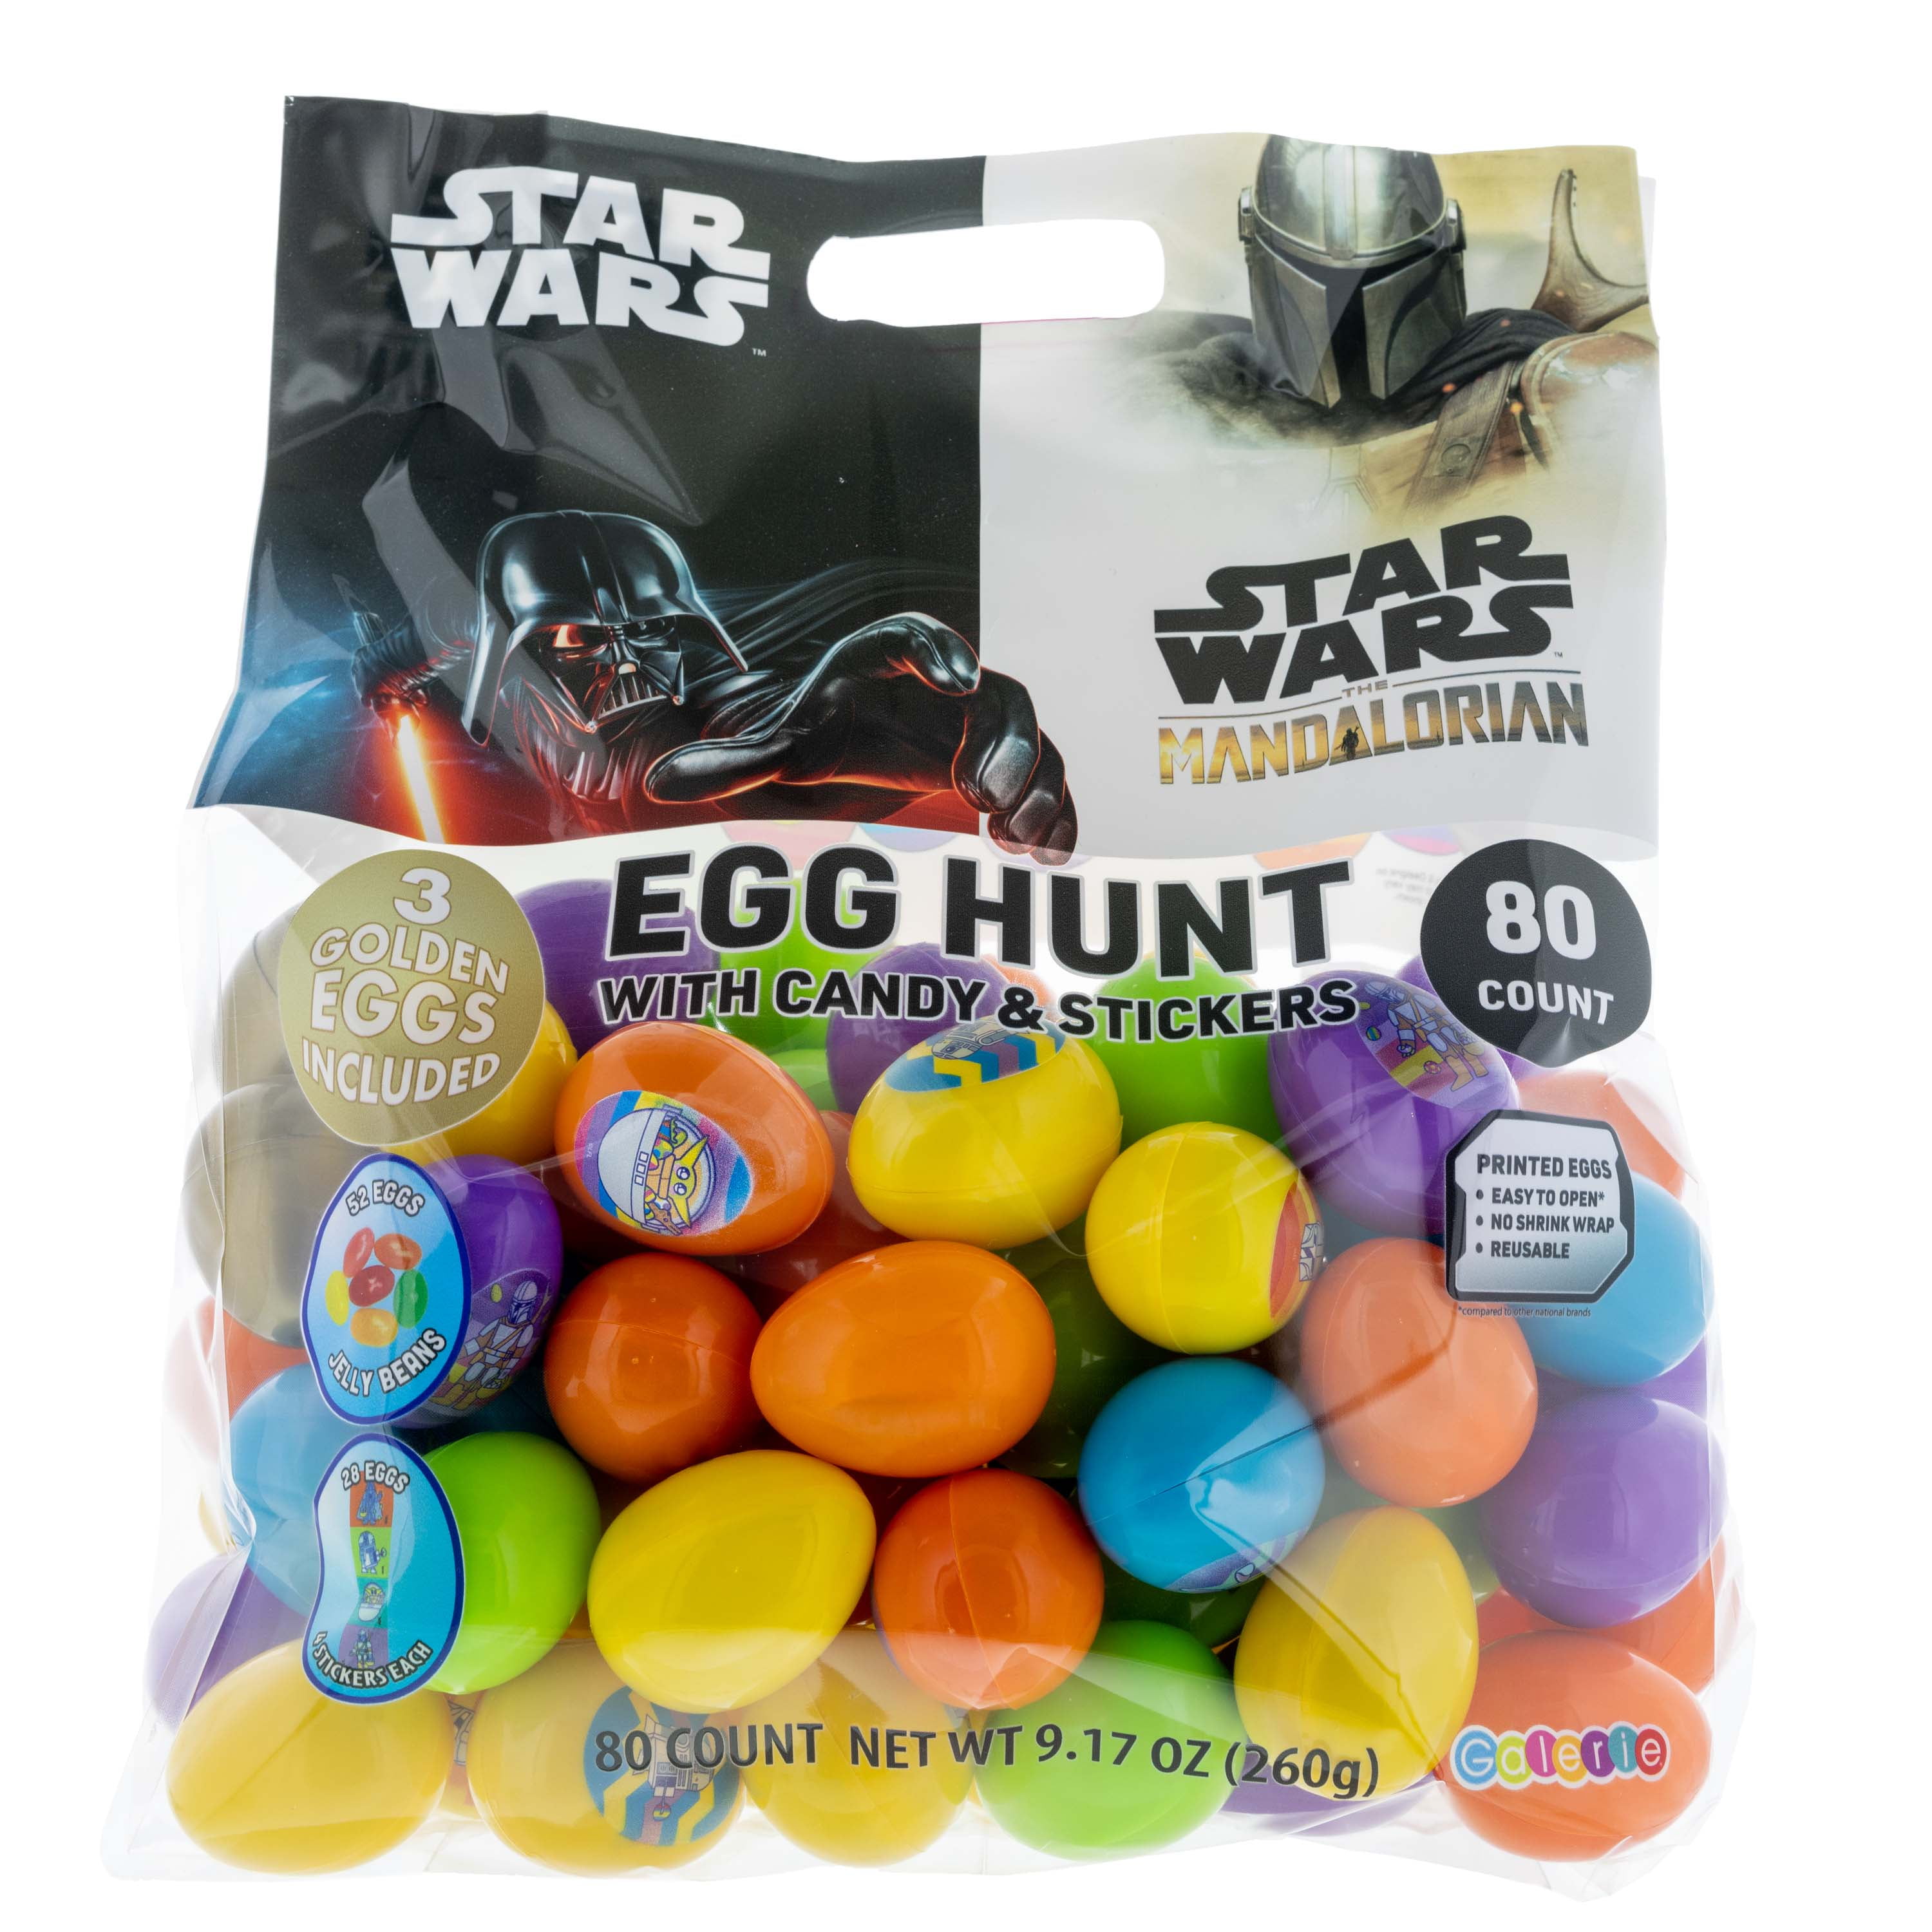 Galerie Star Wars the Mandalorian 80 Count Egg Hunt Bag with Candy and Stickers, 9.17 oz